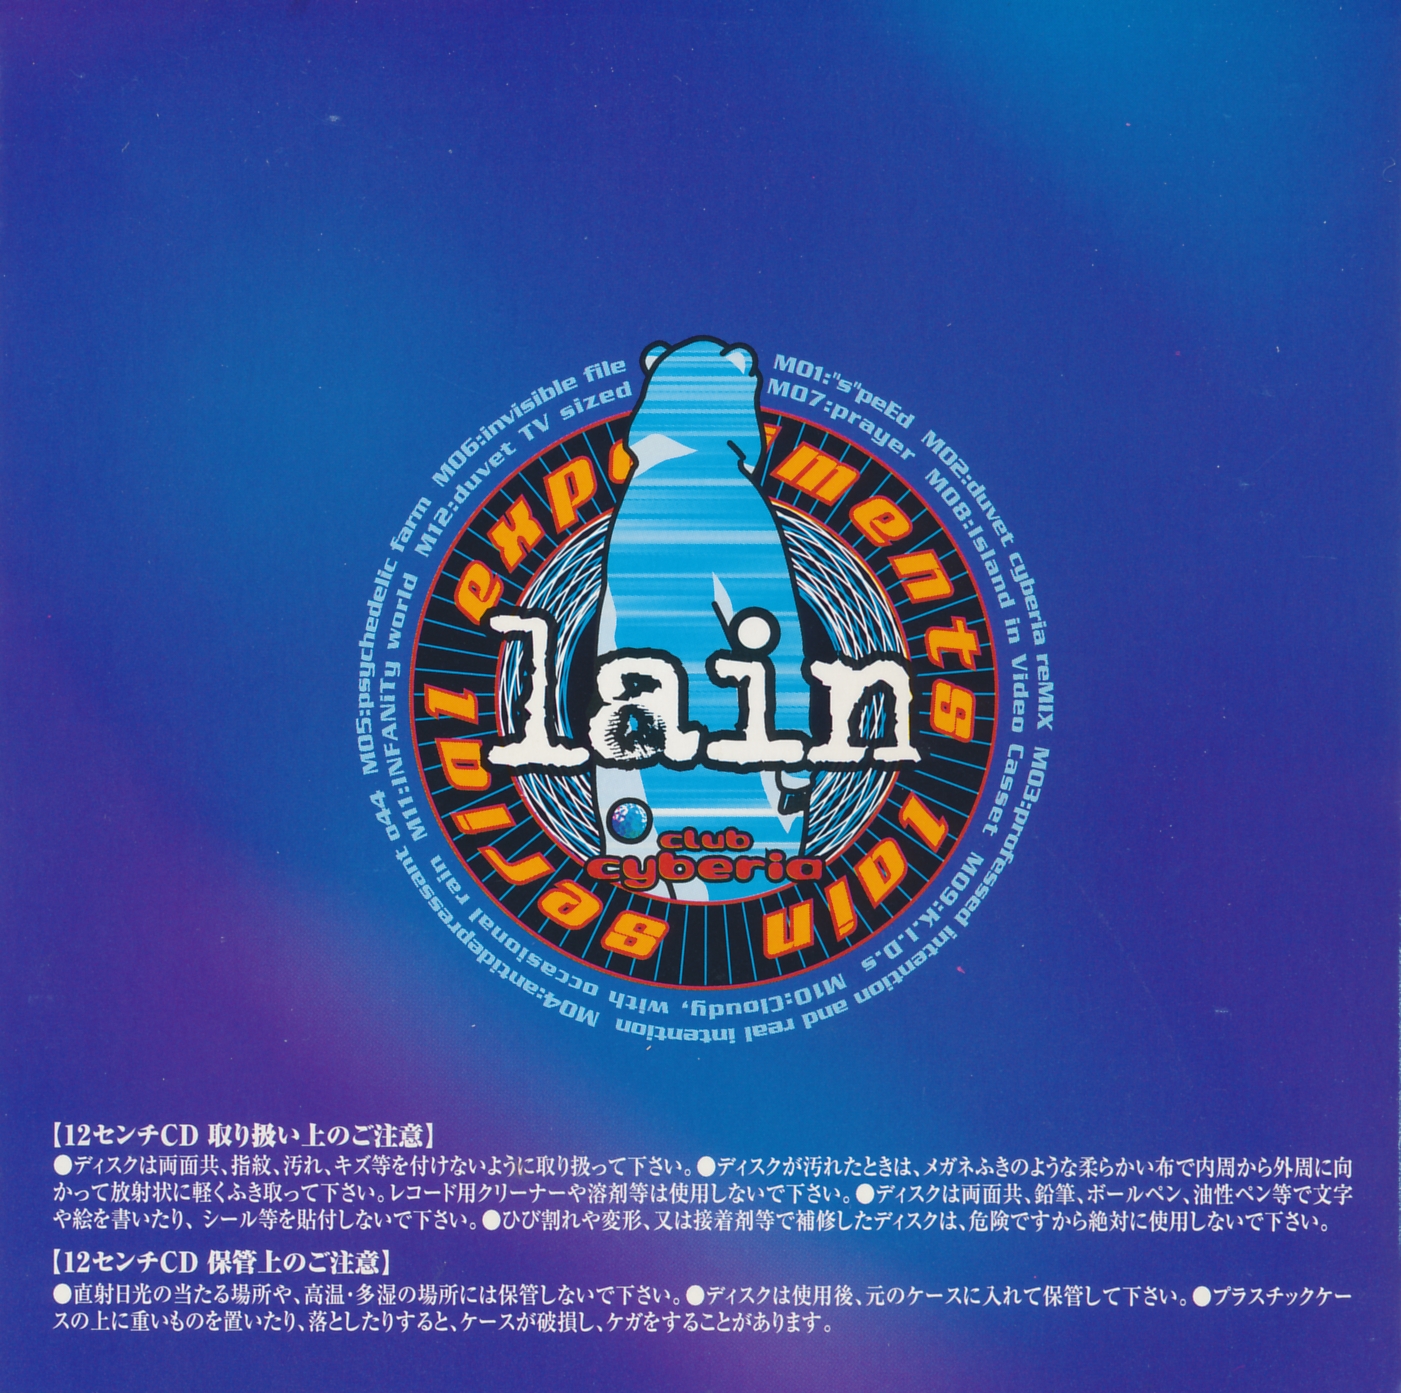 Release “serial experiments lain sound track cyberia mix” by 